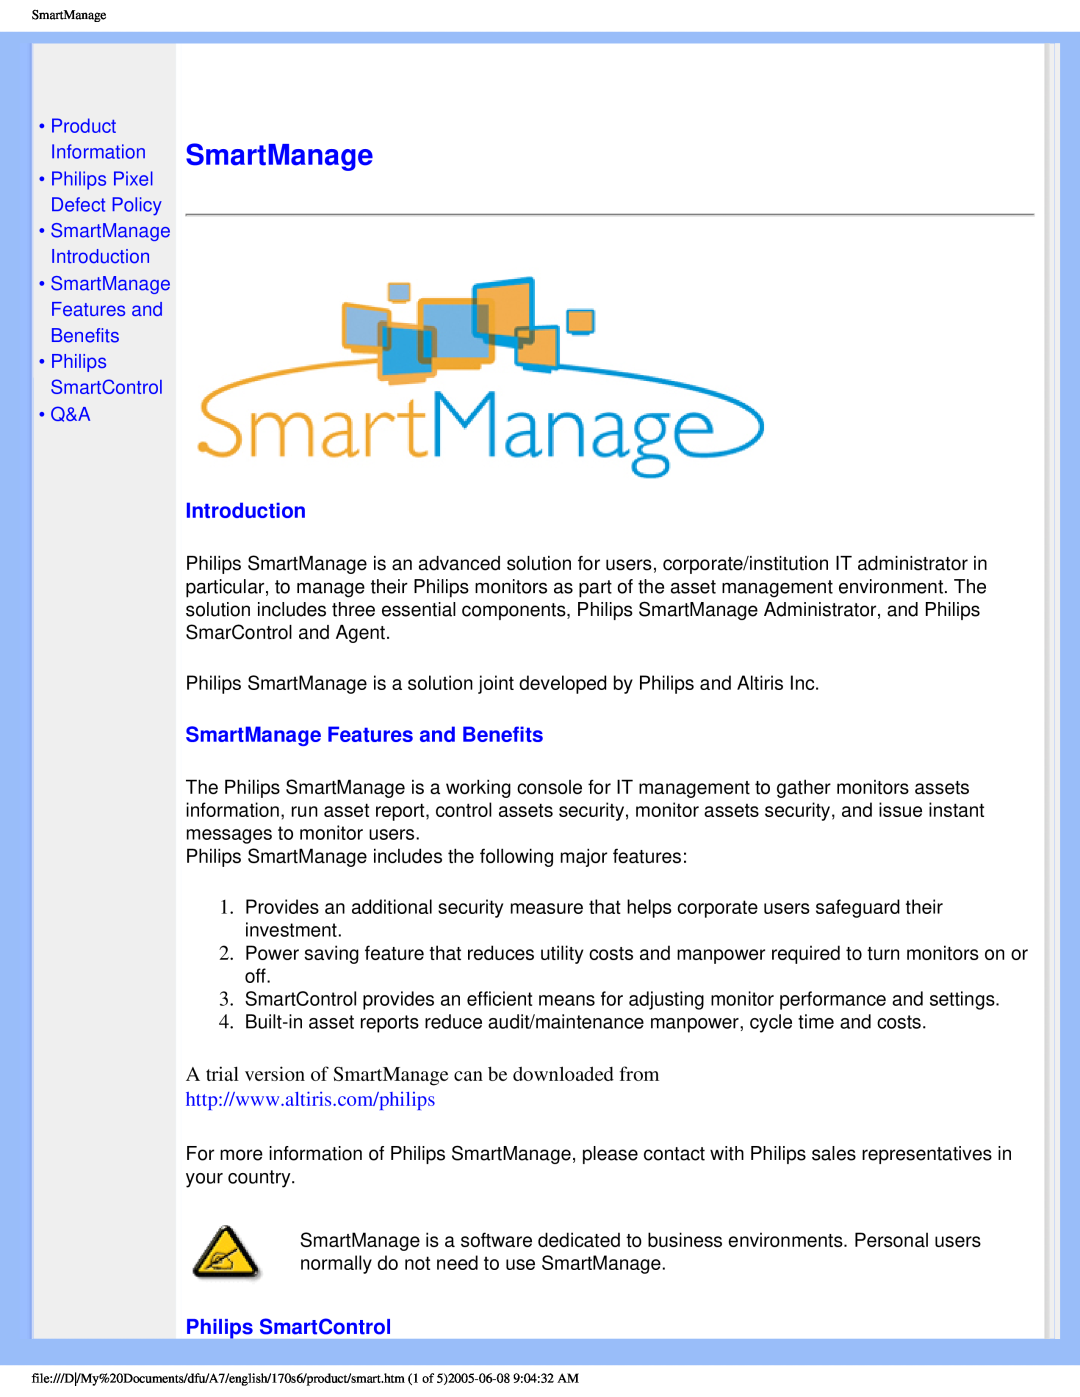 Philips 170s6 Introduction, SmartManage Features and Benefits, A trial version of SmartManage can be downloaded from 